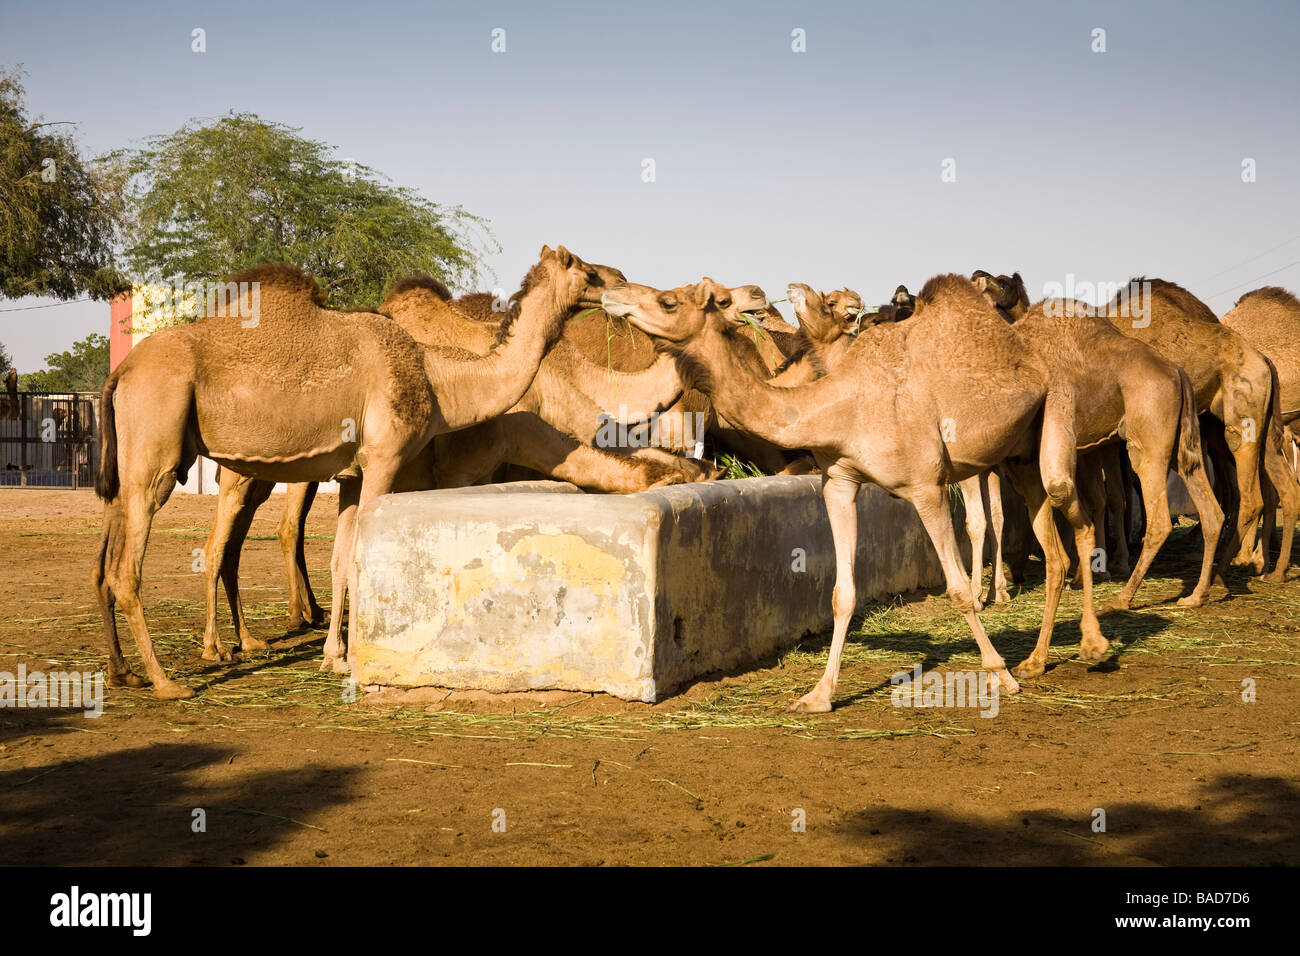 Camels feeding at the National Camel Research Centre, Jorbeer, Bikaner, Rajasthan, India Stock Photo